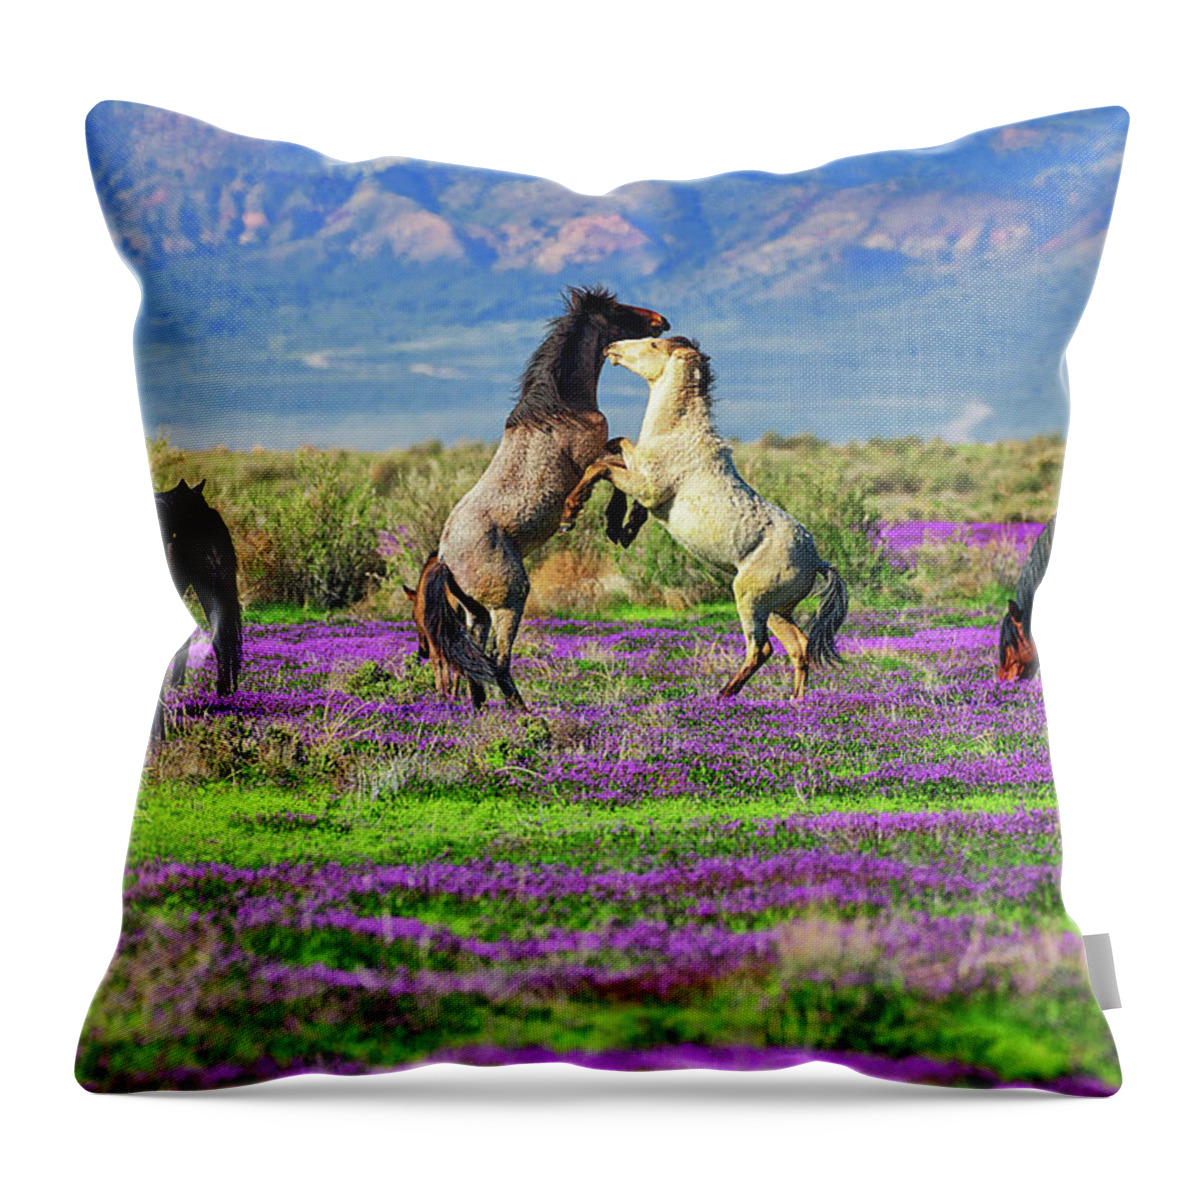 Horses Throw Pillow featuring the photograph Let's Dance by Greg Norrell